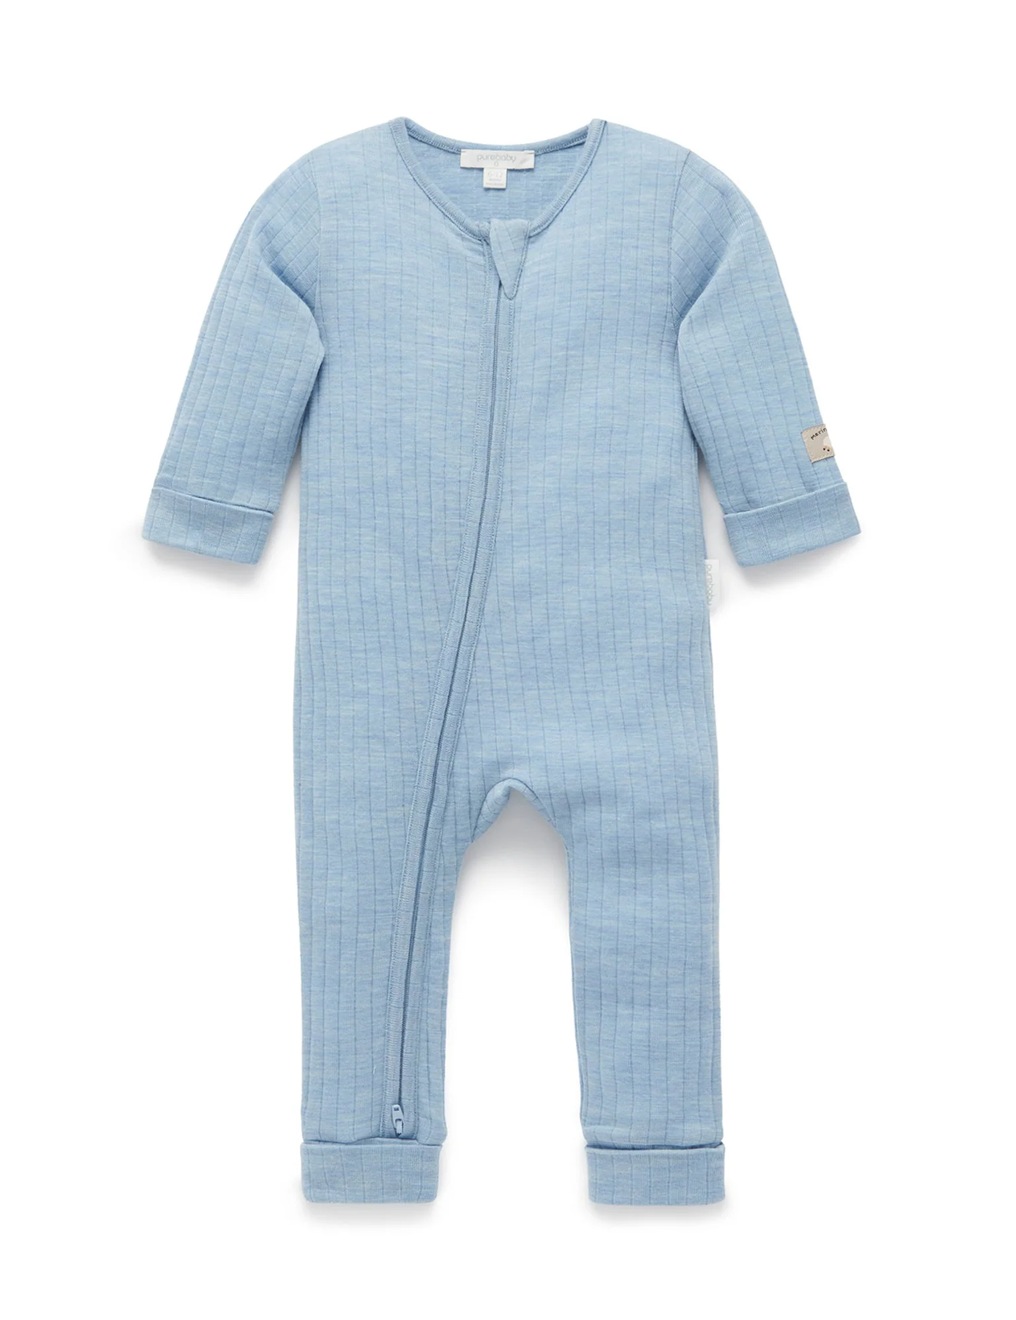 Merino Growsuit offers at $69.95 in Purebaby